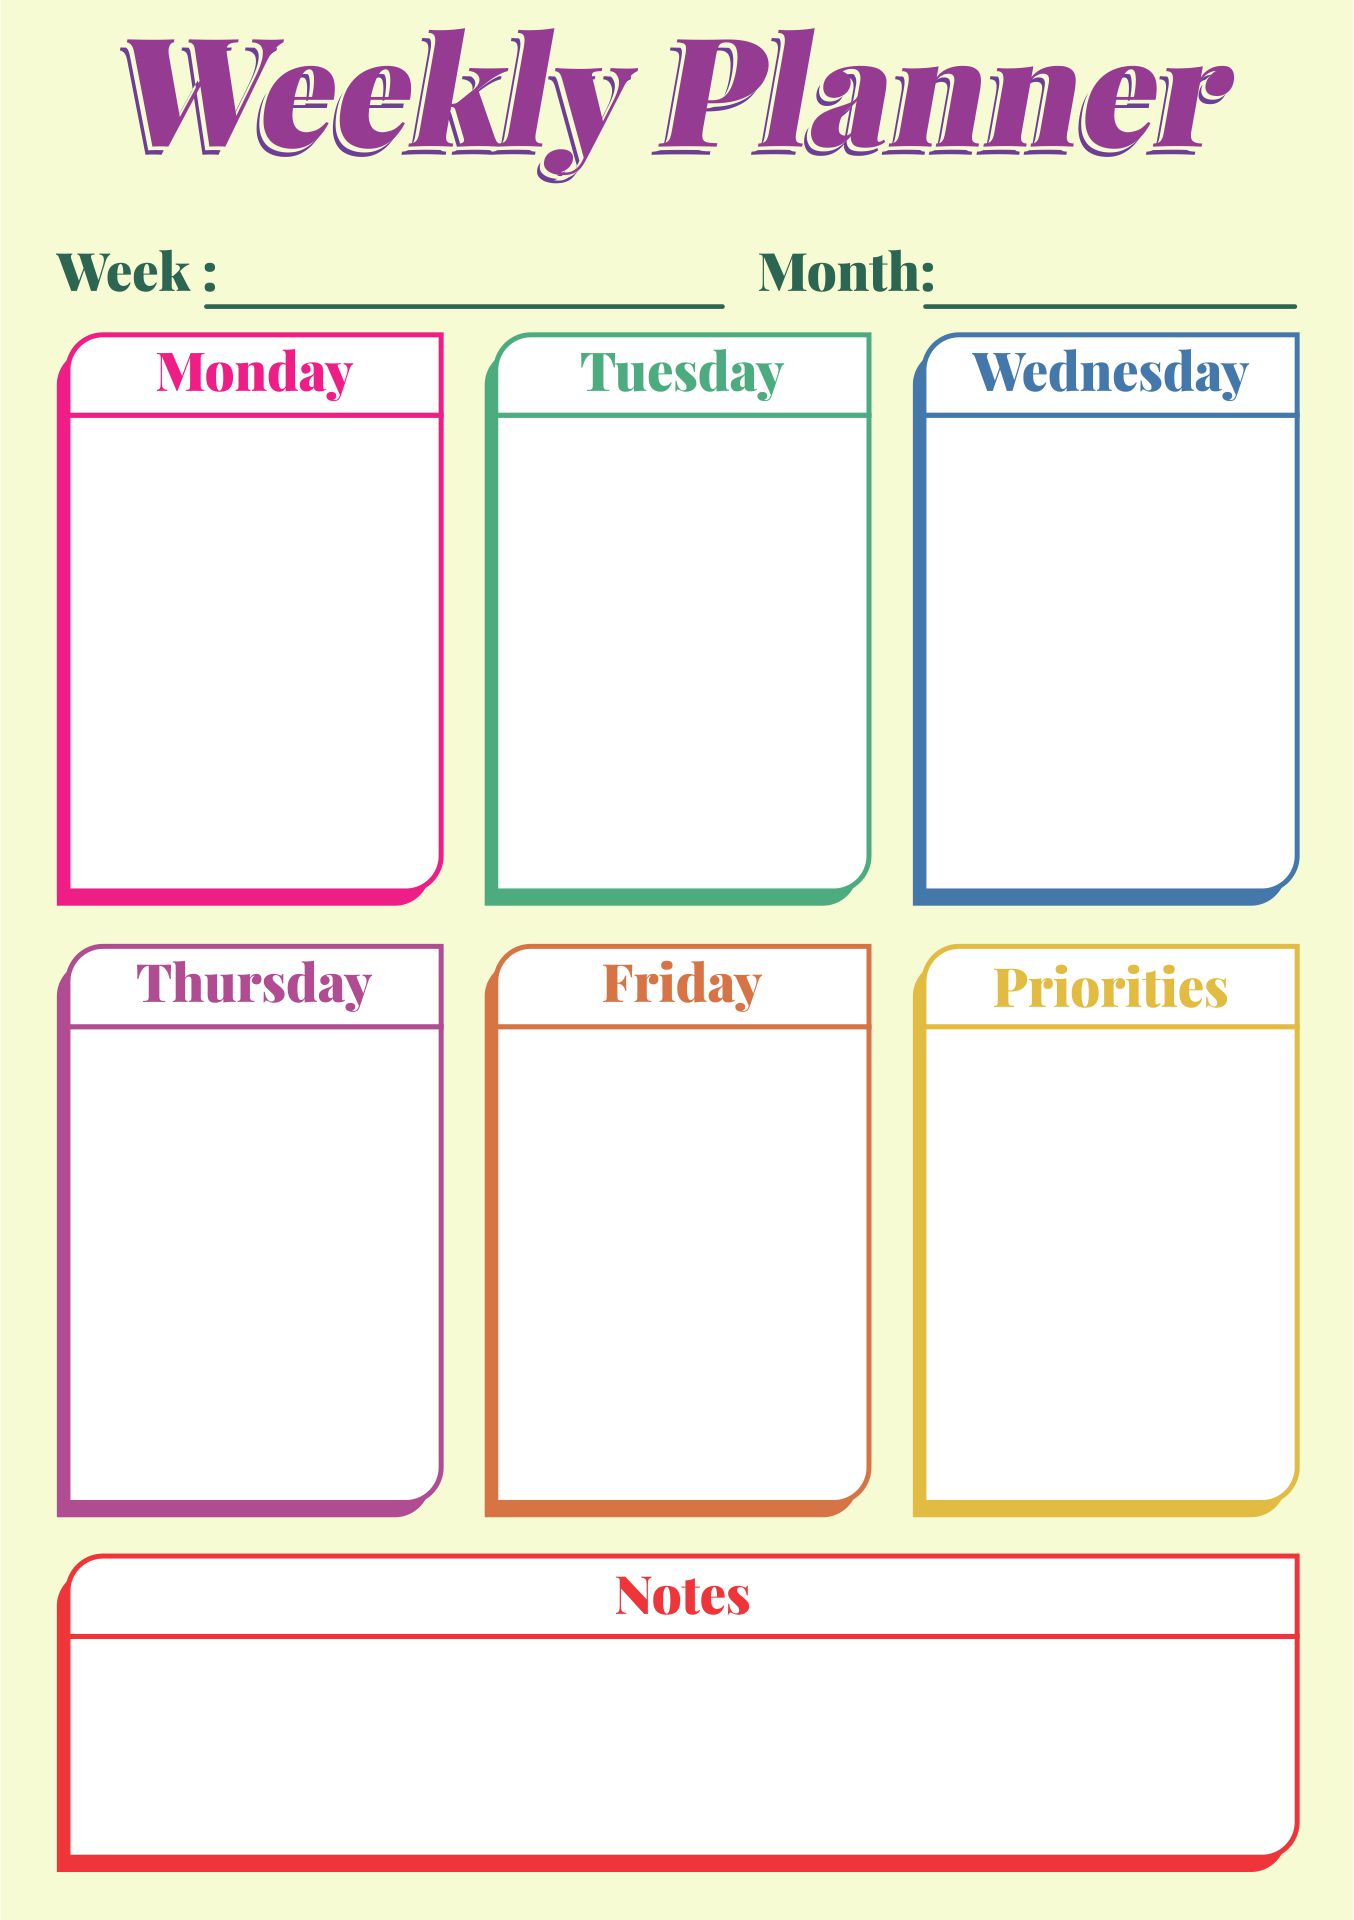 7 Best Images of 5 Day Work Week Monthly Calendar Printable 5 Day